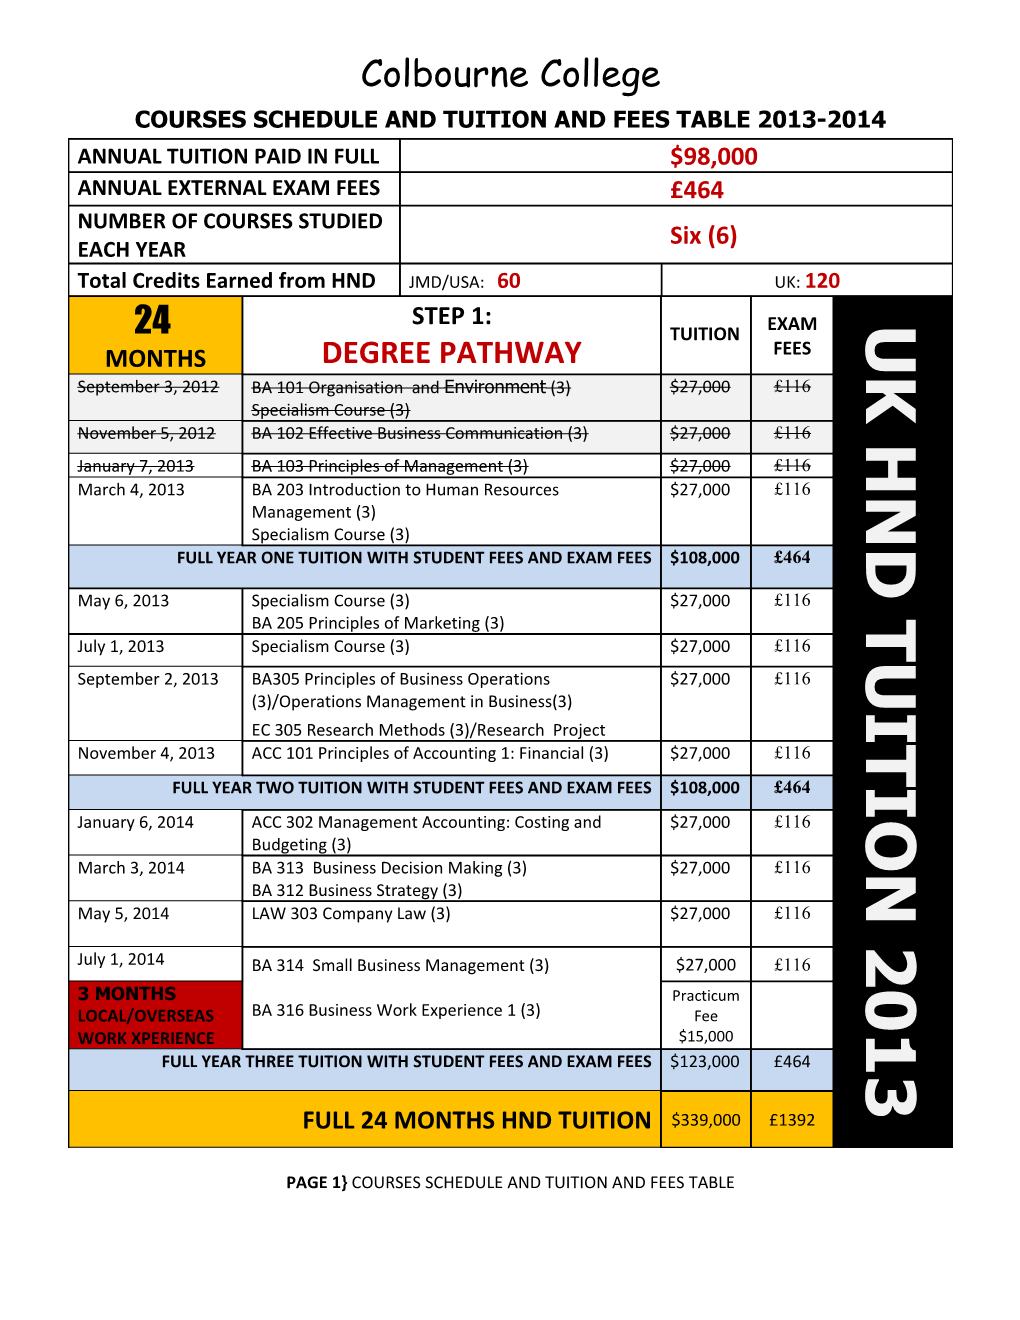 Courses Schedule and Tuition and Fees Table 2013-2014